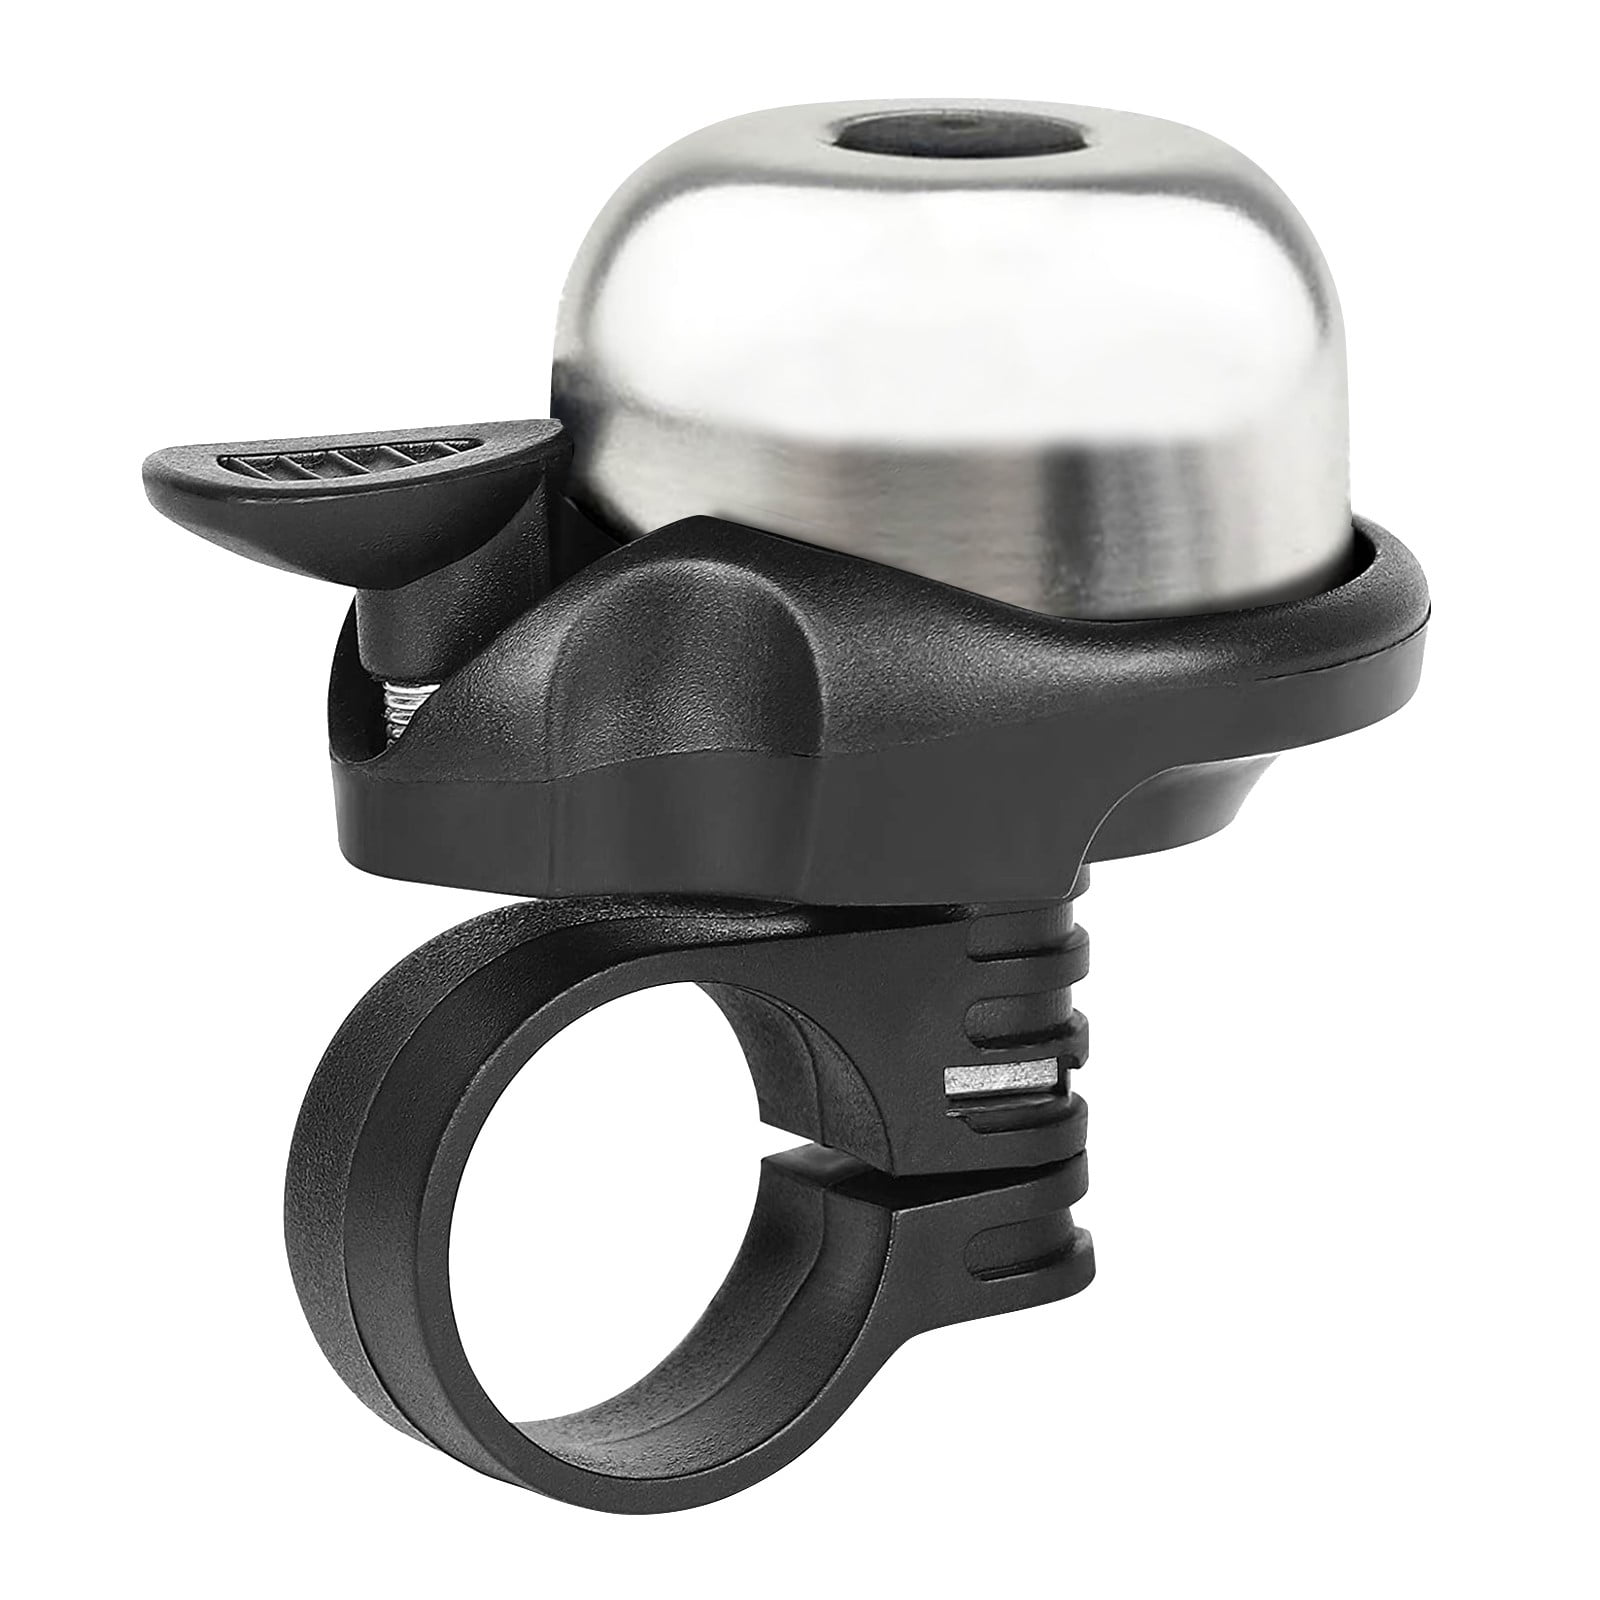 Mini Bicycle Bike Bell Cycling Handlebar Horn Ring High New  Alarm   Safety